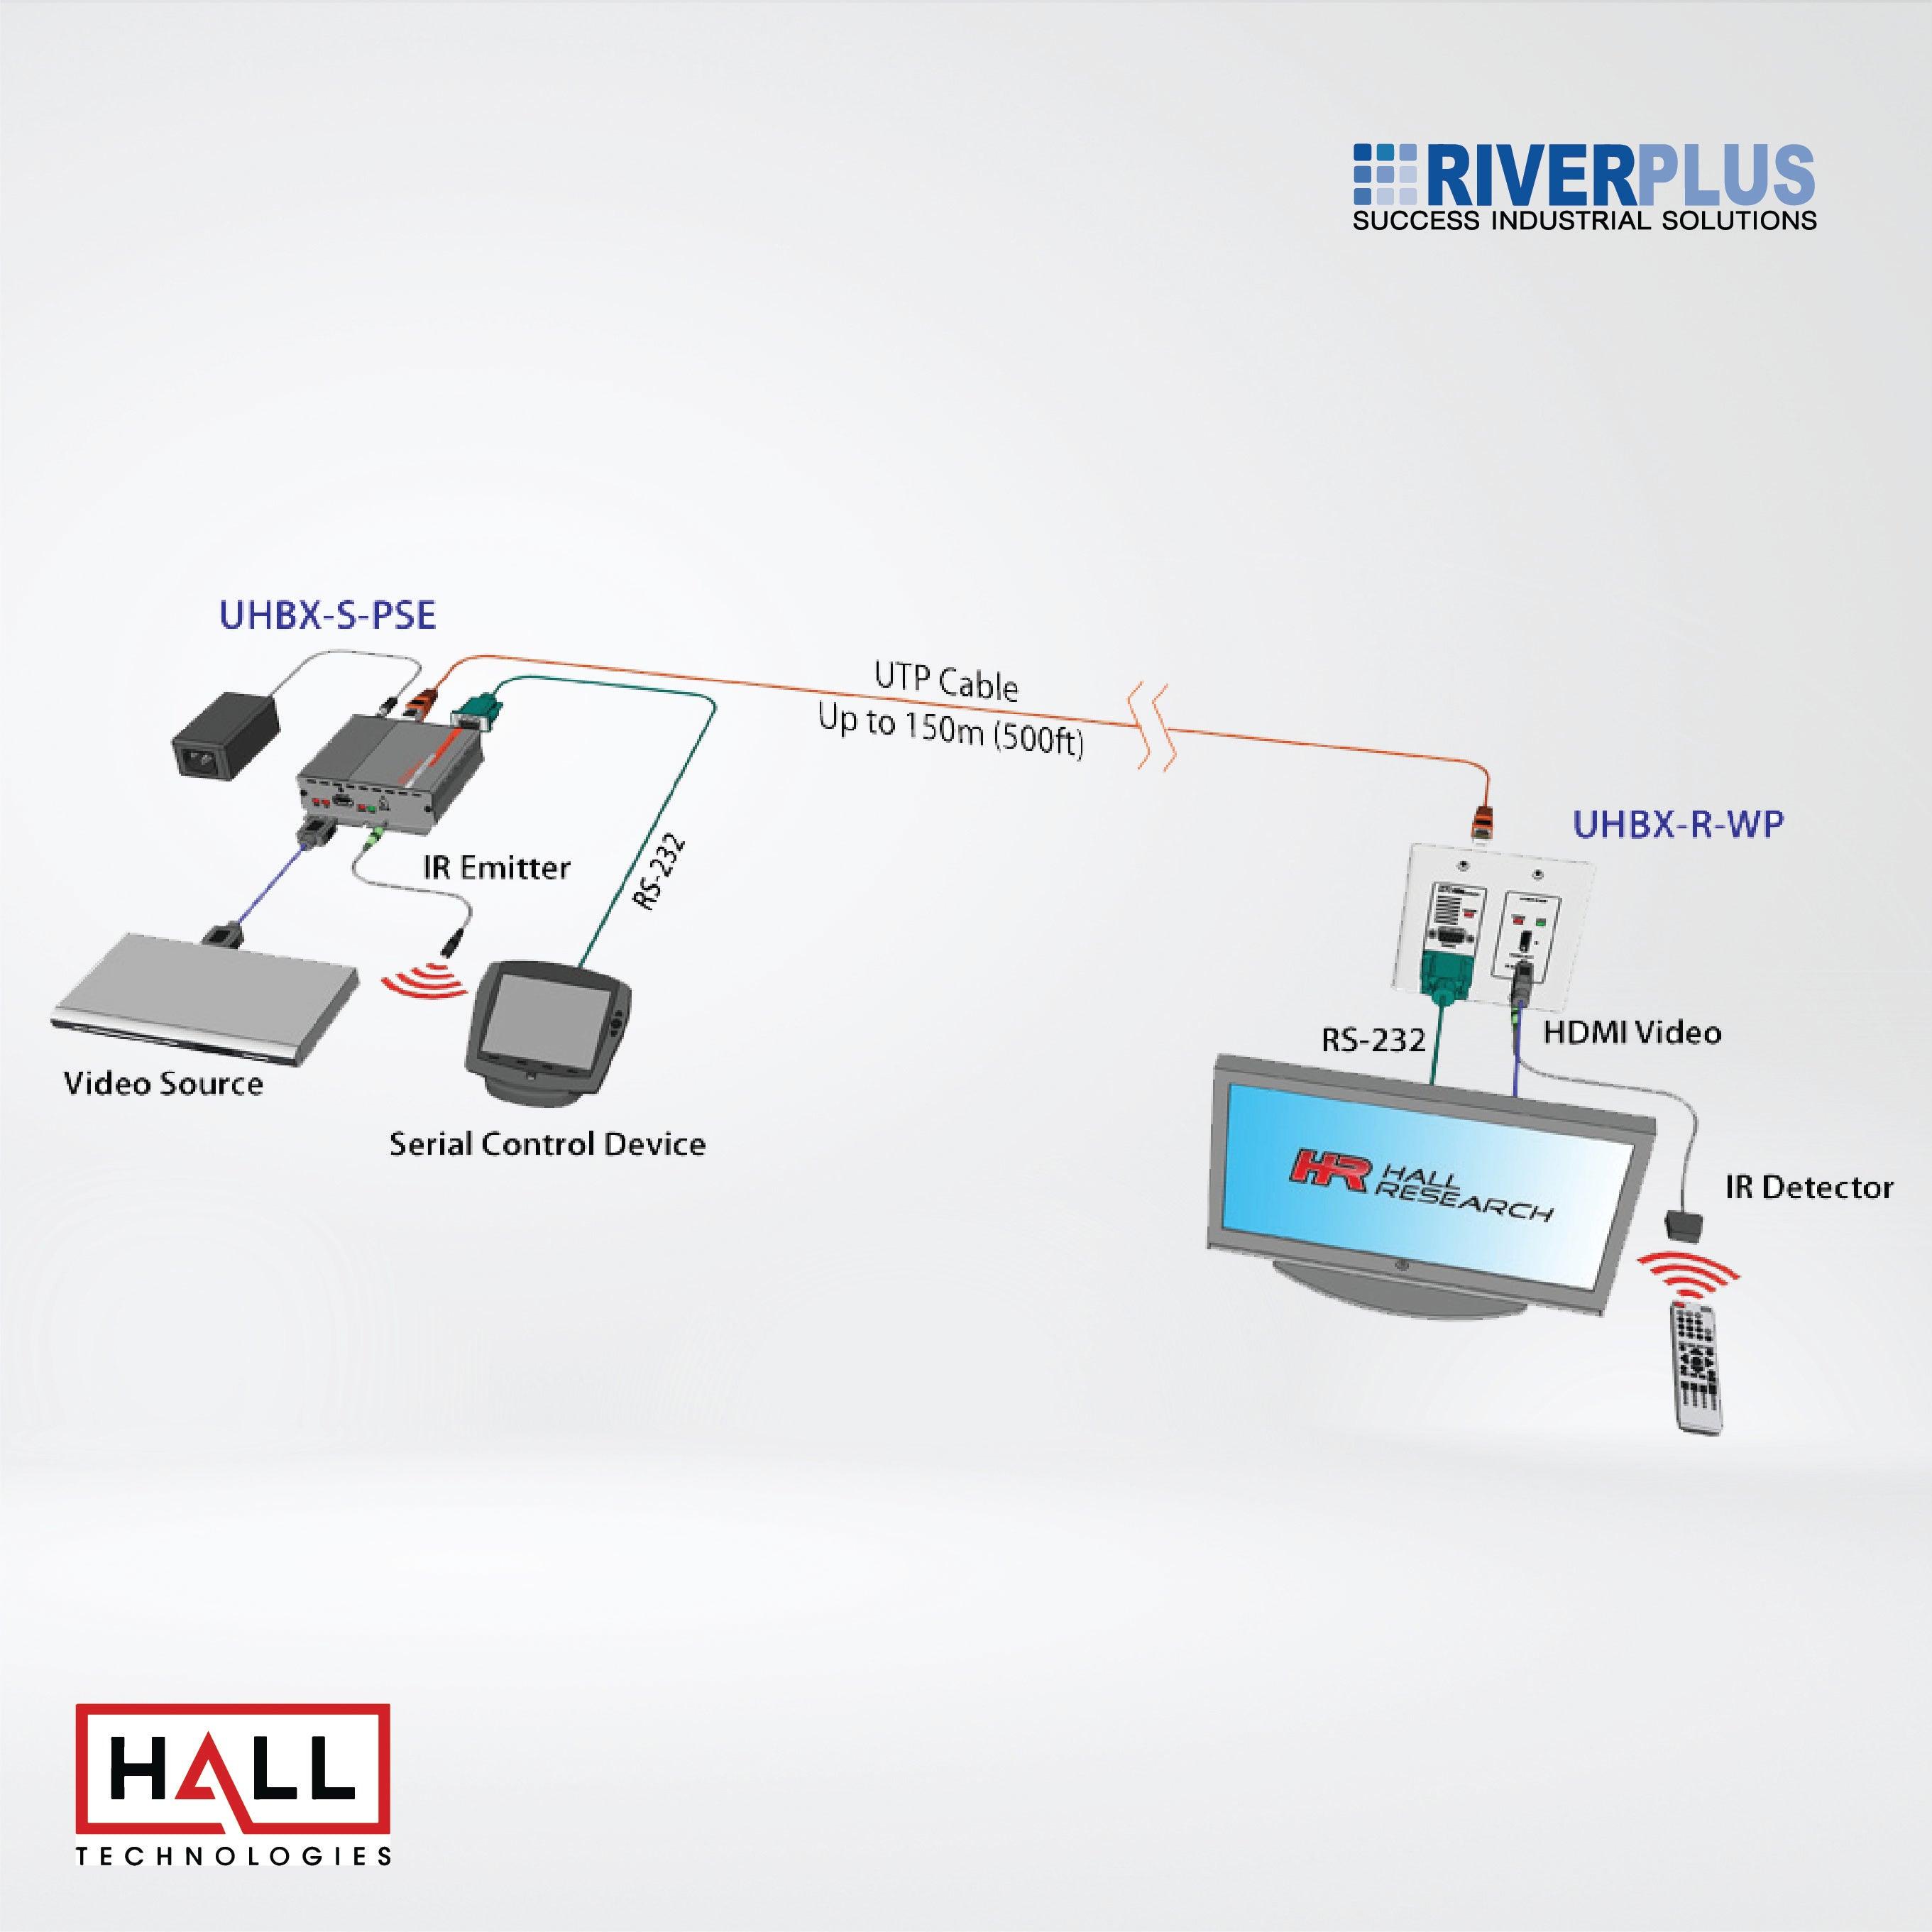 UHBX-R-WP HDBaseT™ Wall Plate Receiver with IR, RS-232, and PoH - Riverplus